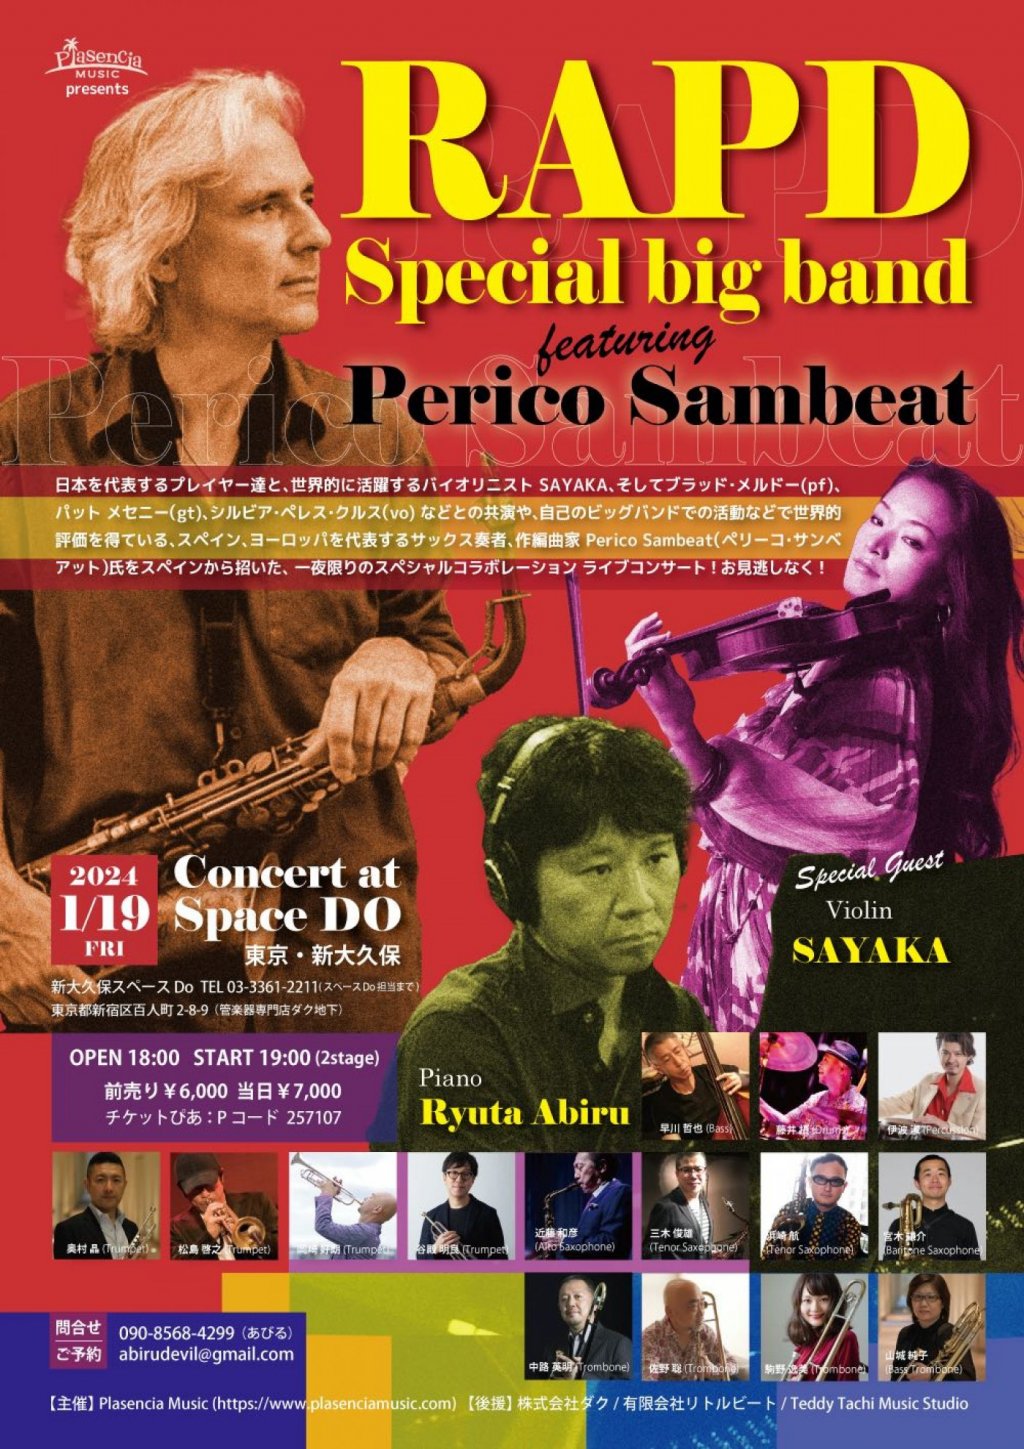 RAPD Special big band featuring  Perico Sambeat  Concert at space DO